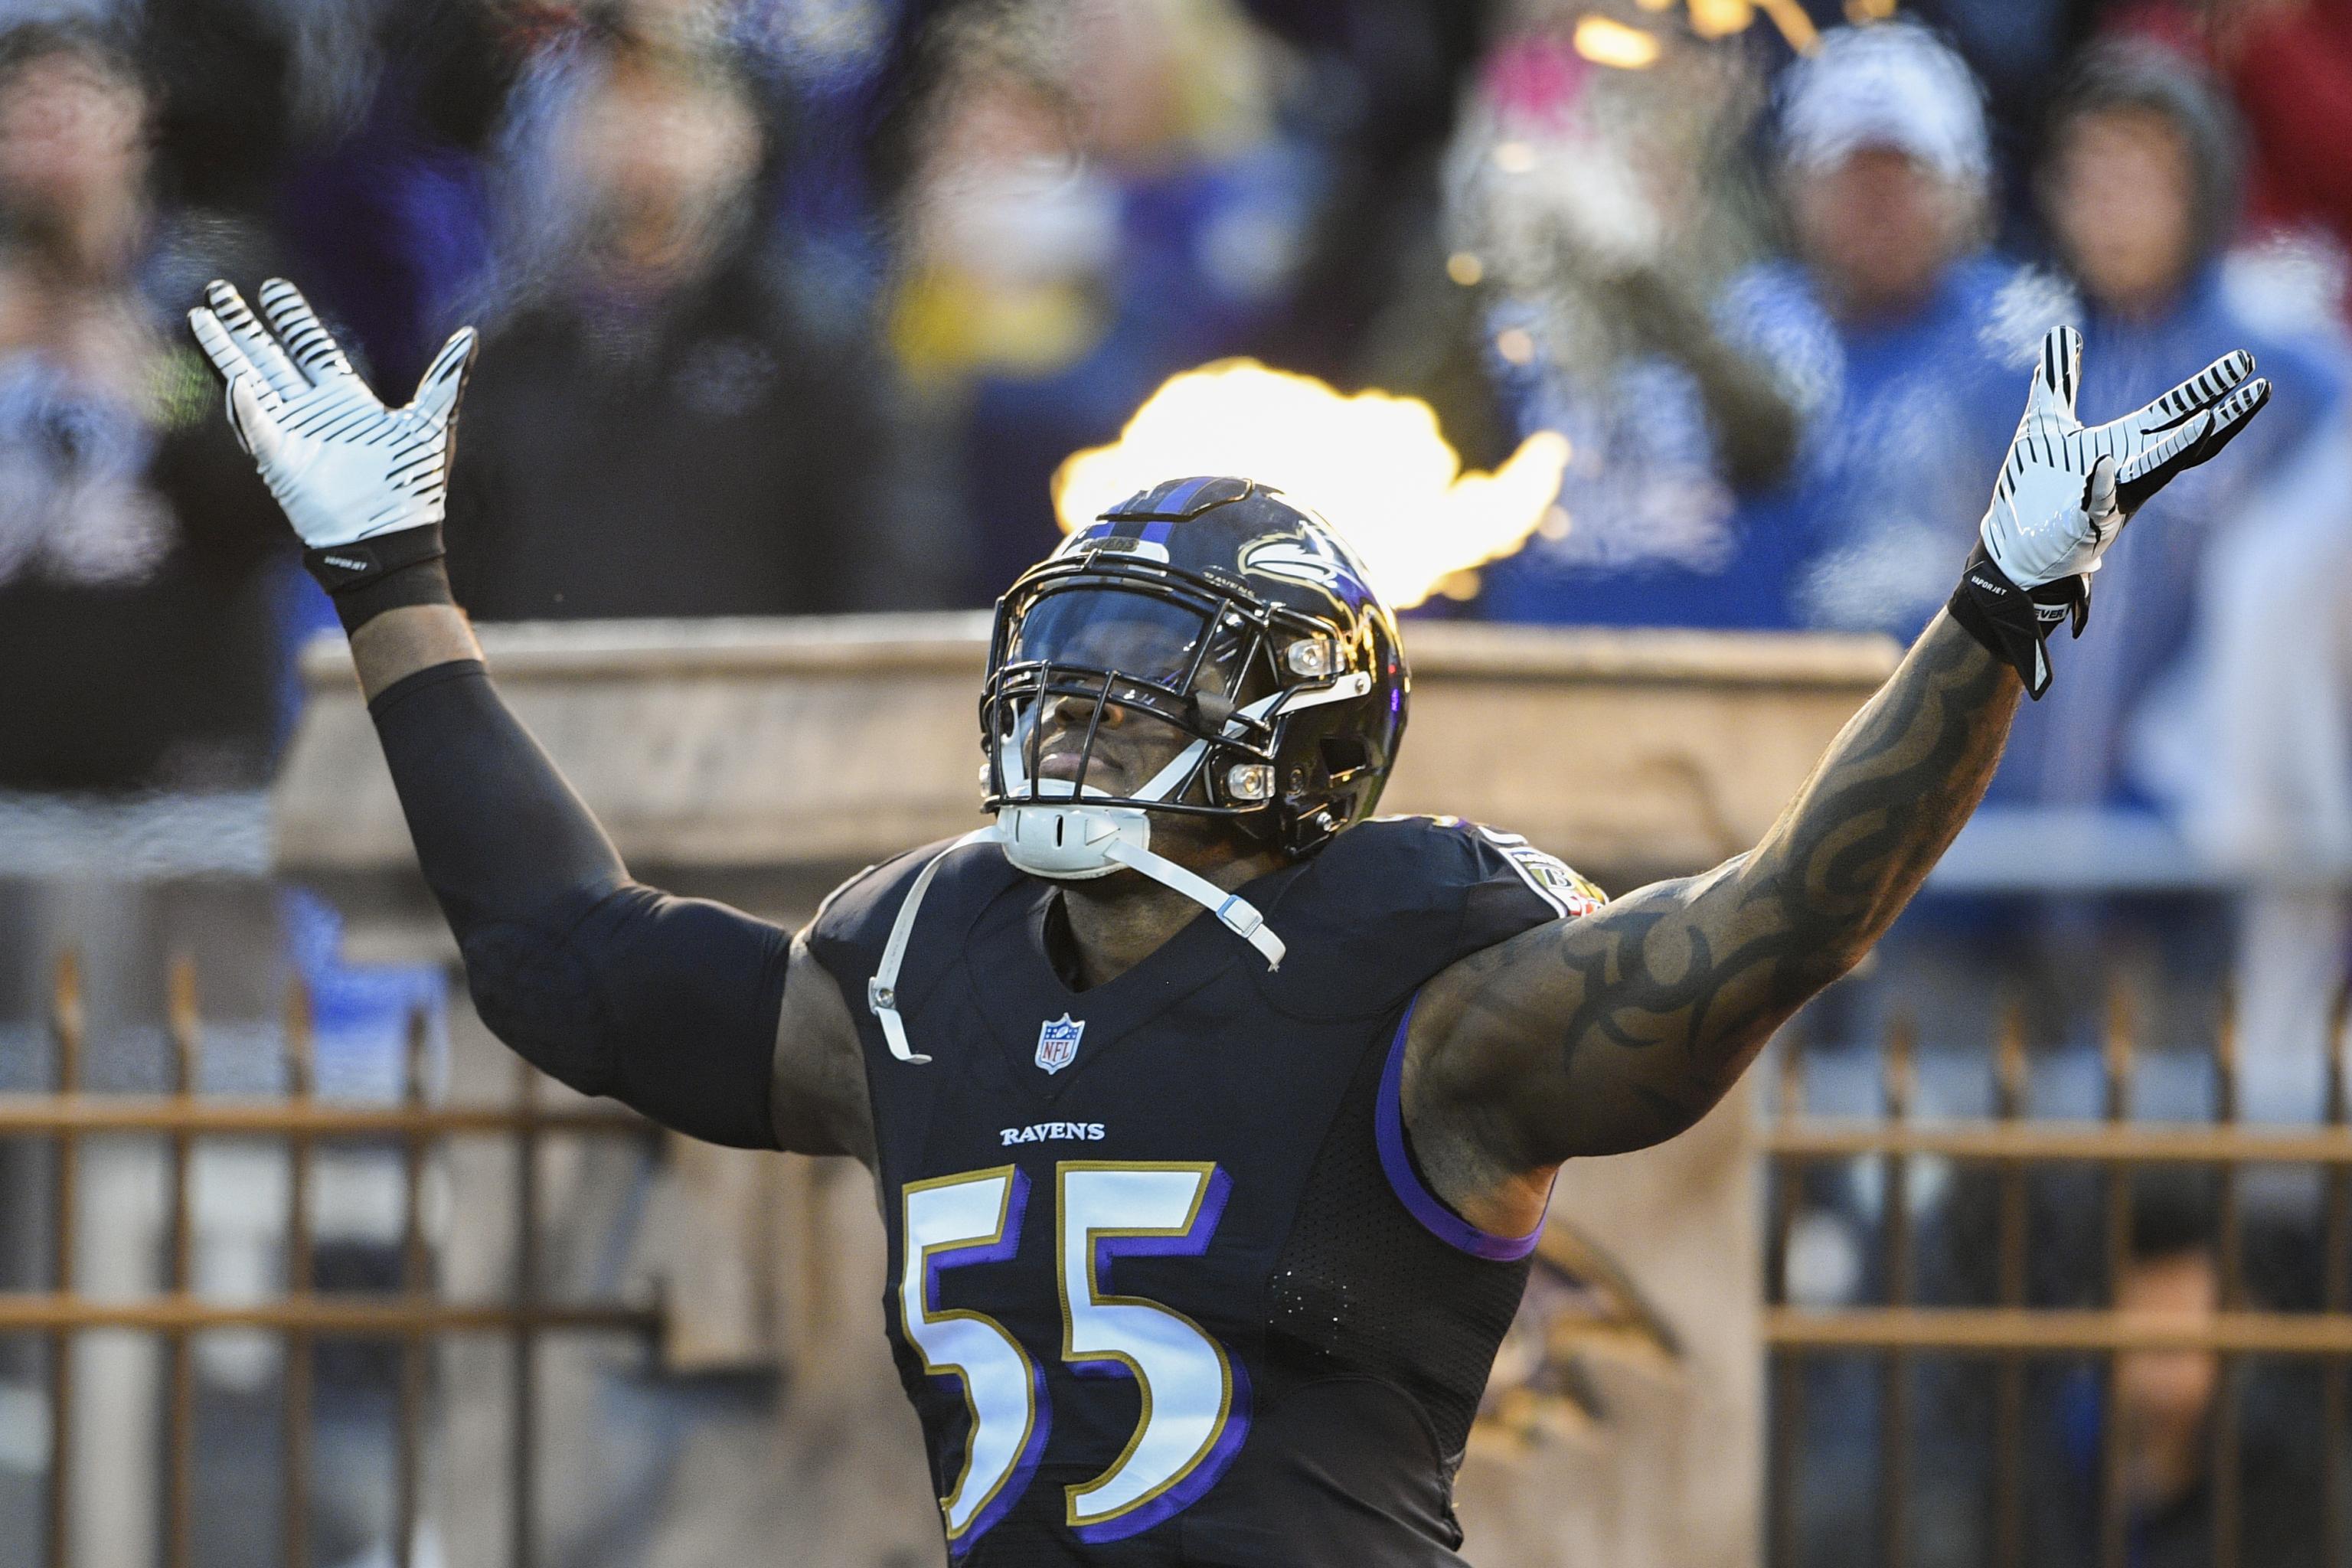 Today in Pro Football History: Rookie of the Year: Terrell Suggs, 2003